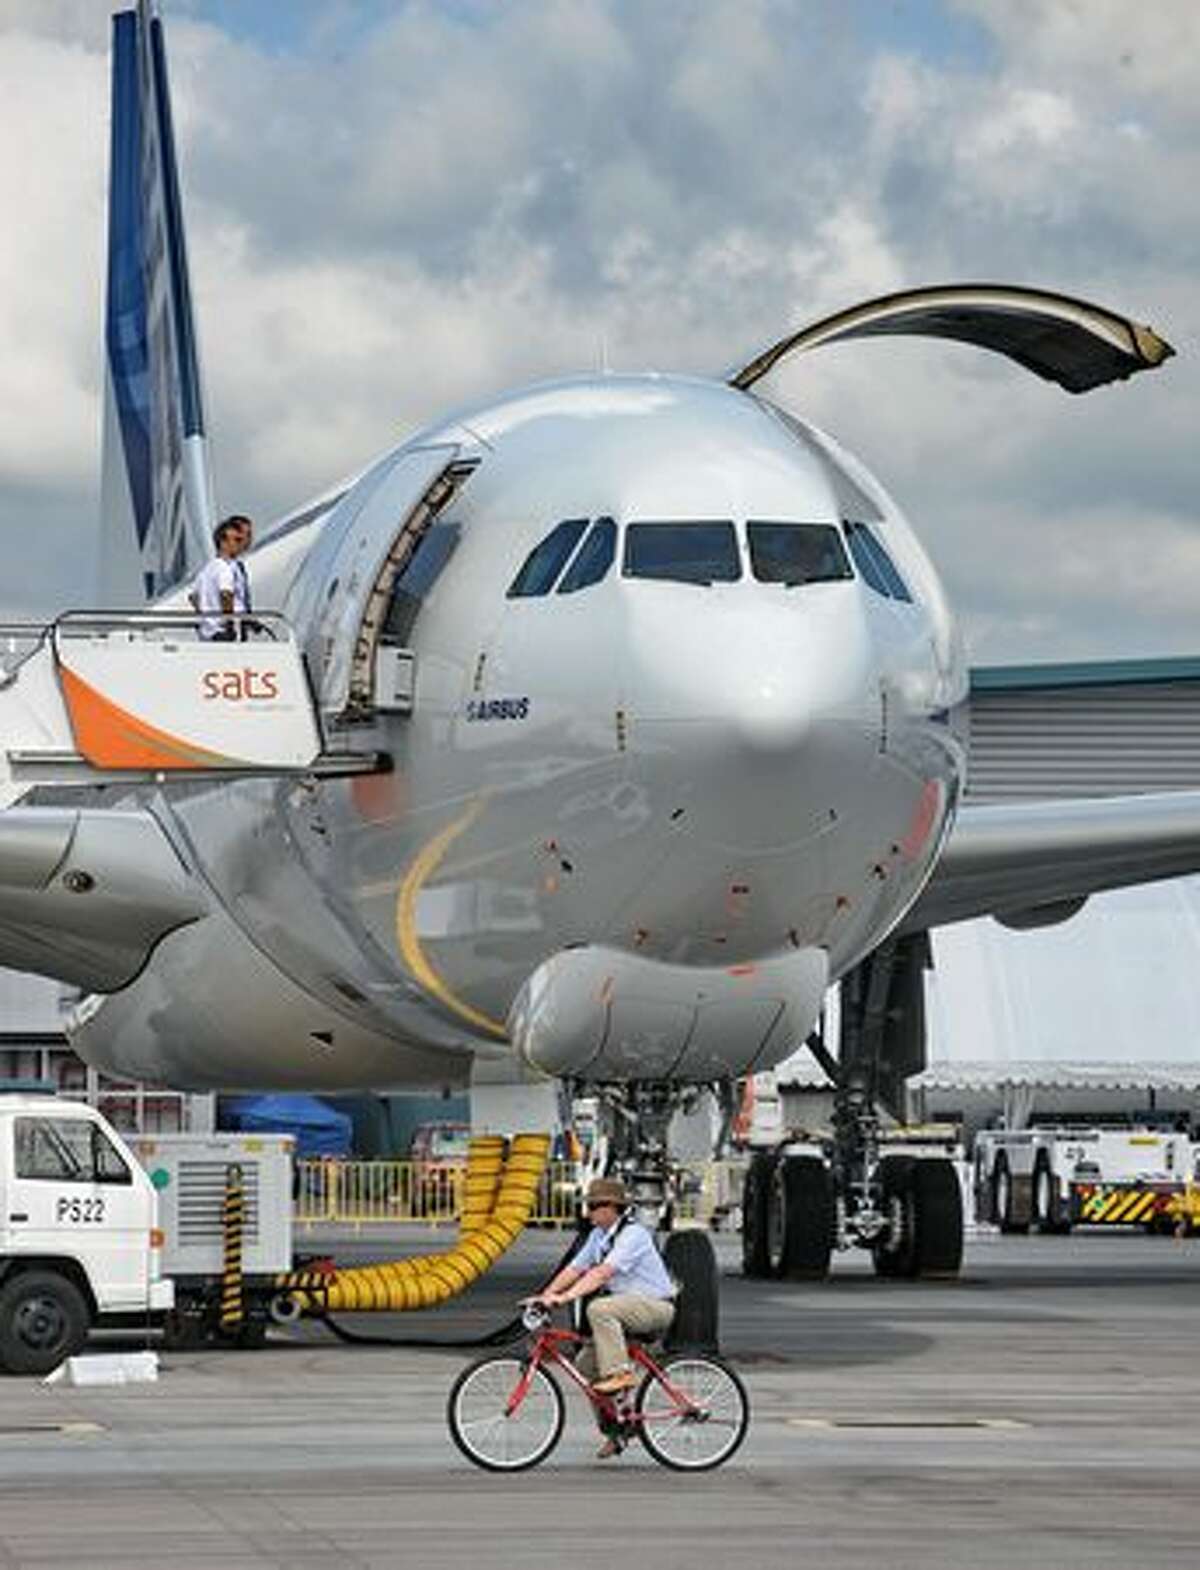 A cyclist rides past an Airbus A330-200F cargo plane for the static display at the Singapore Airshow on Feb. 1, 2010.